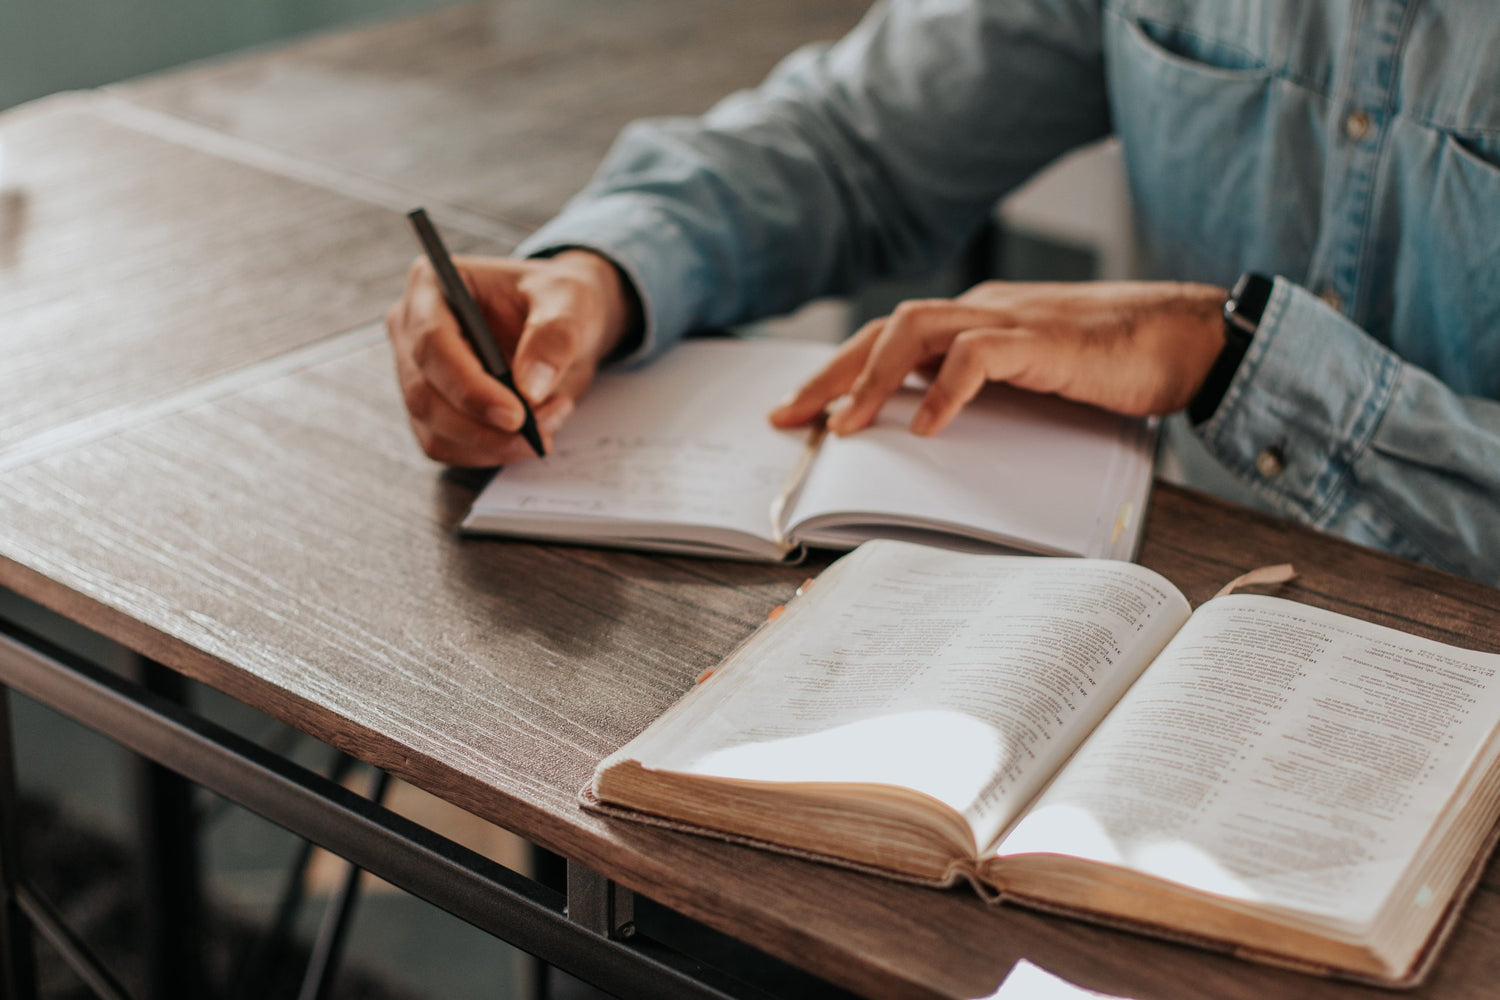 3 Reminders from Teaching Theology to Church Leaders